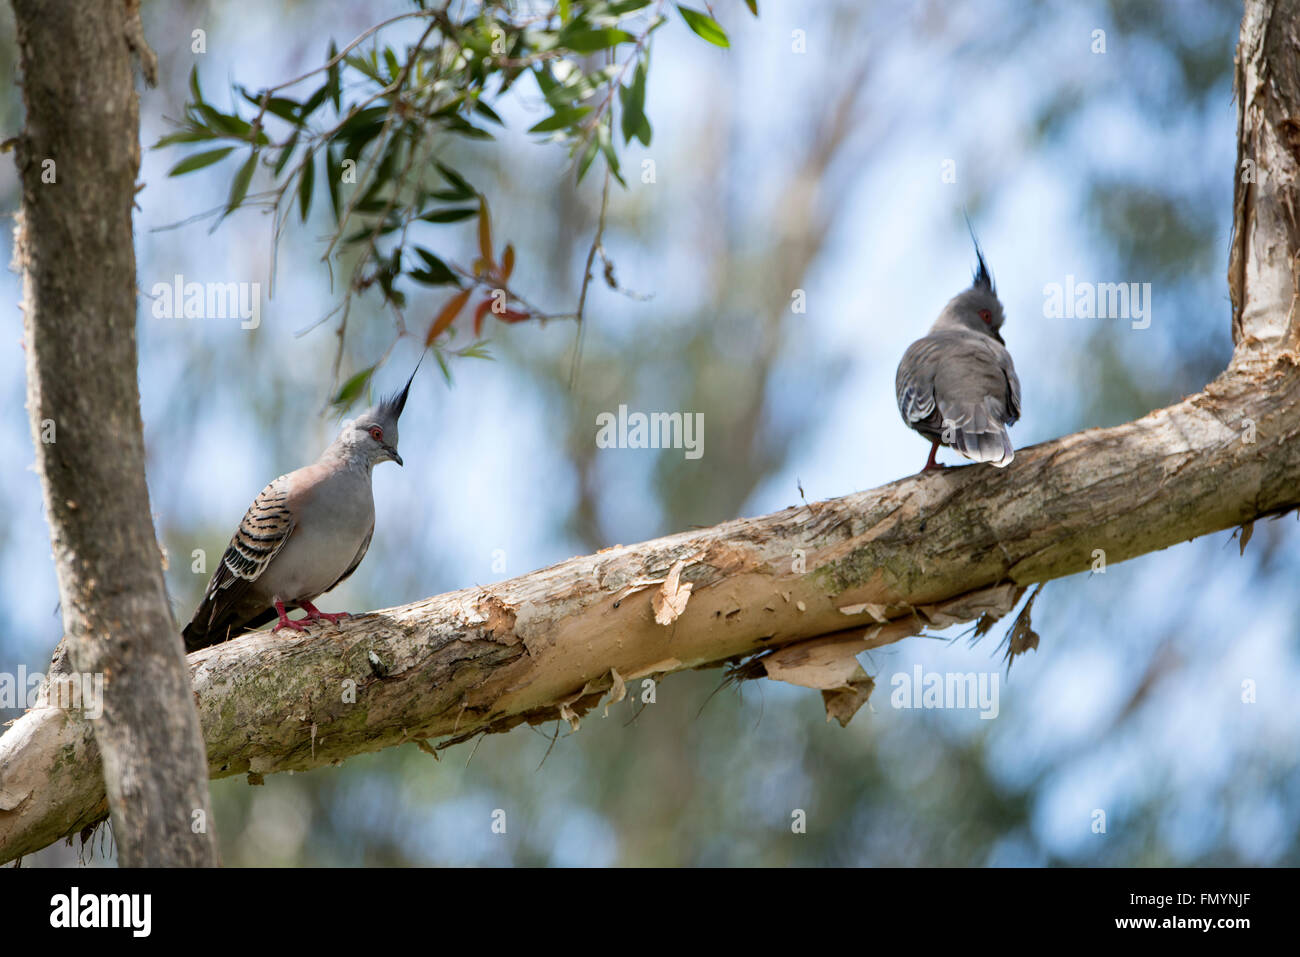 A couple of crested pigeons in Queensland, Australia Stock Photo